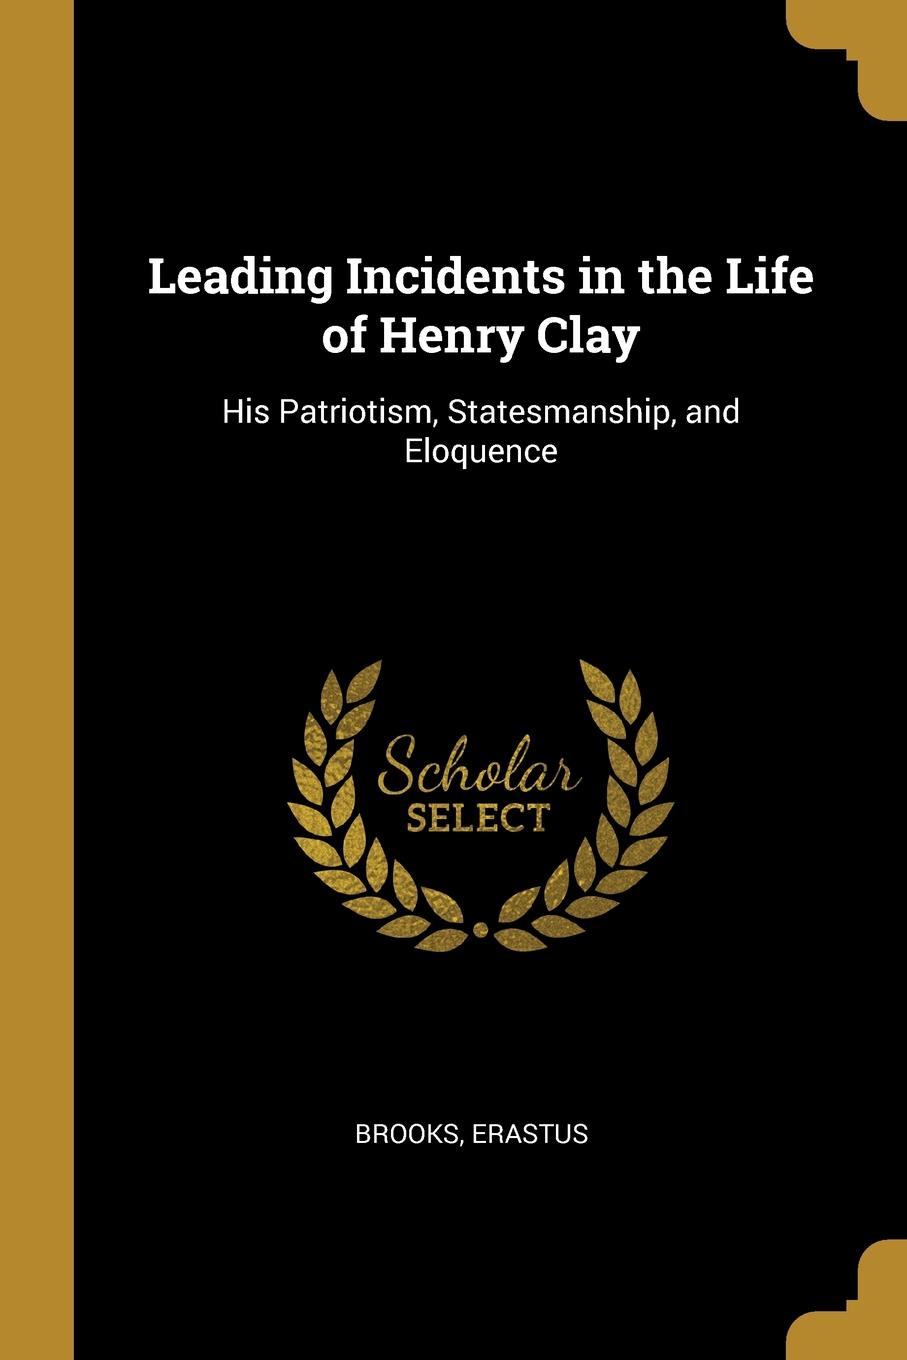 Leading Incidents in the Life of Henry Clay. His Patriotism, Statesmanship, and Eloquence